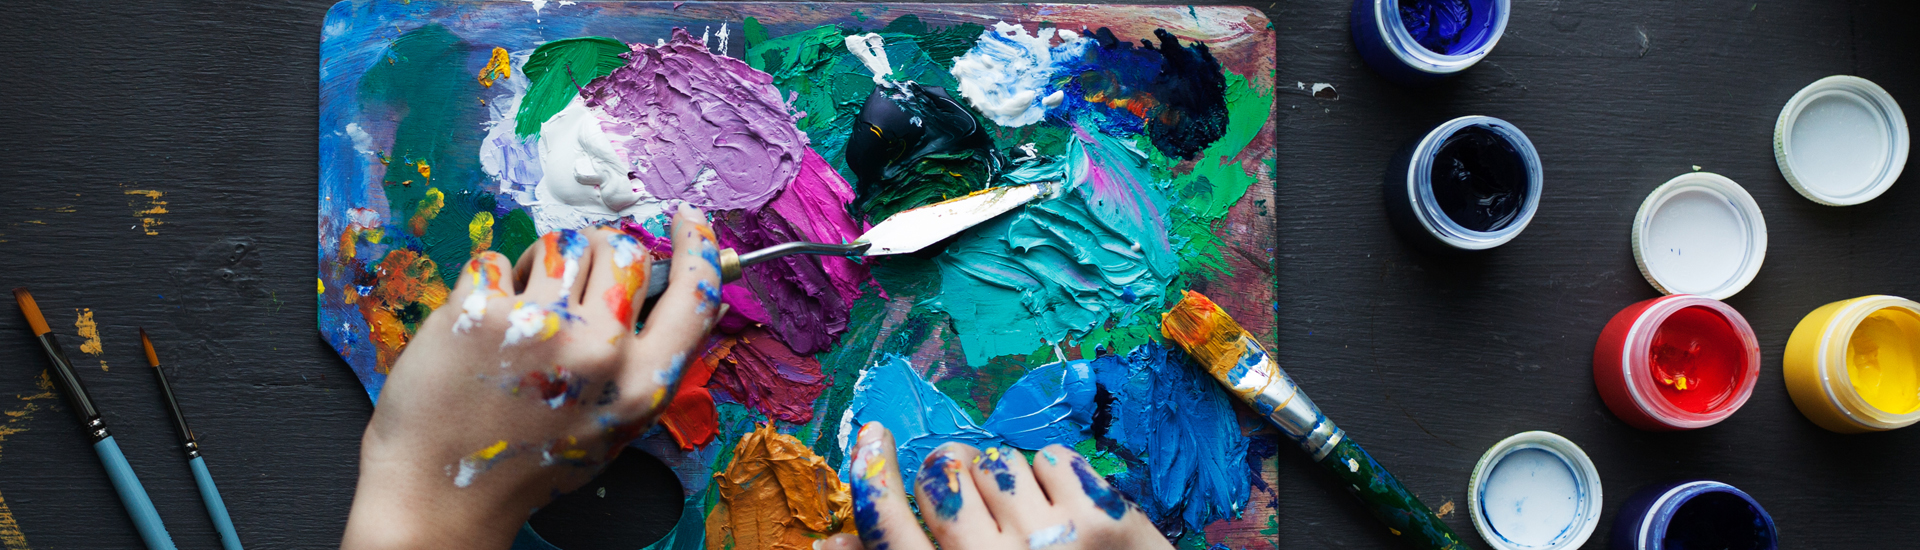 The Artist's Hands with Palette Knife